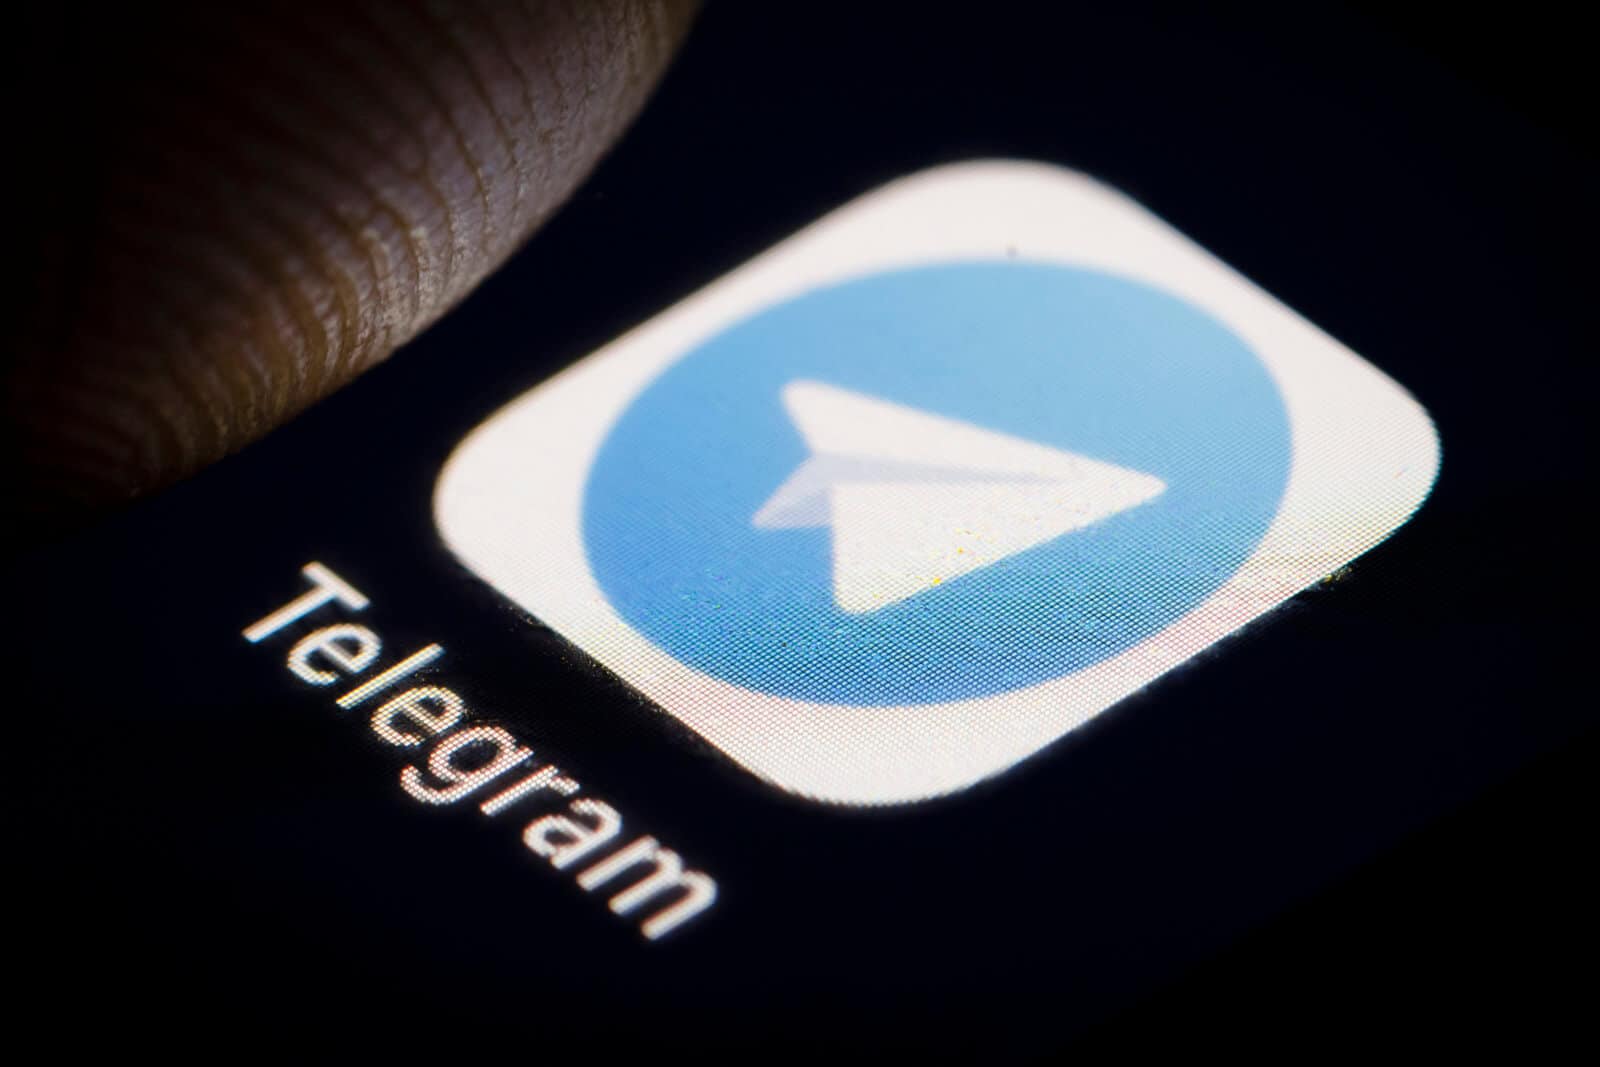 Telegram’s Cryptocurrency Sells for 3X Its ICO Price Even before Public Launch